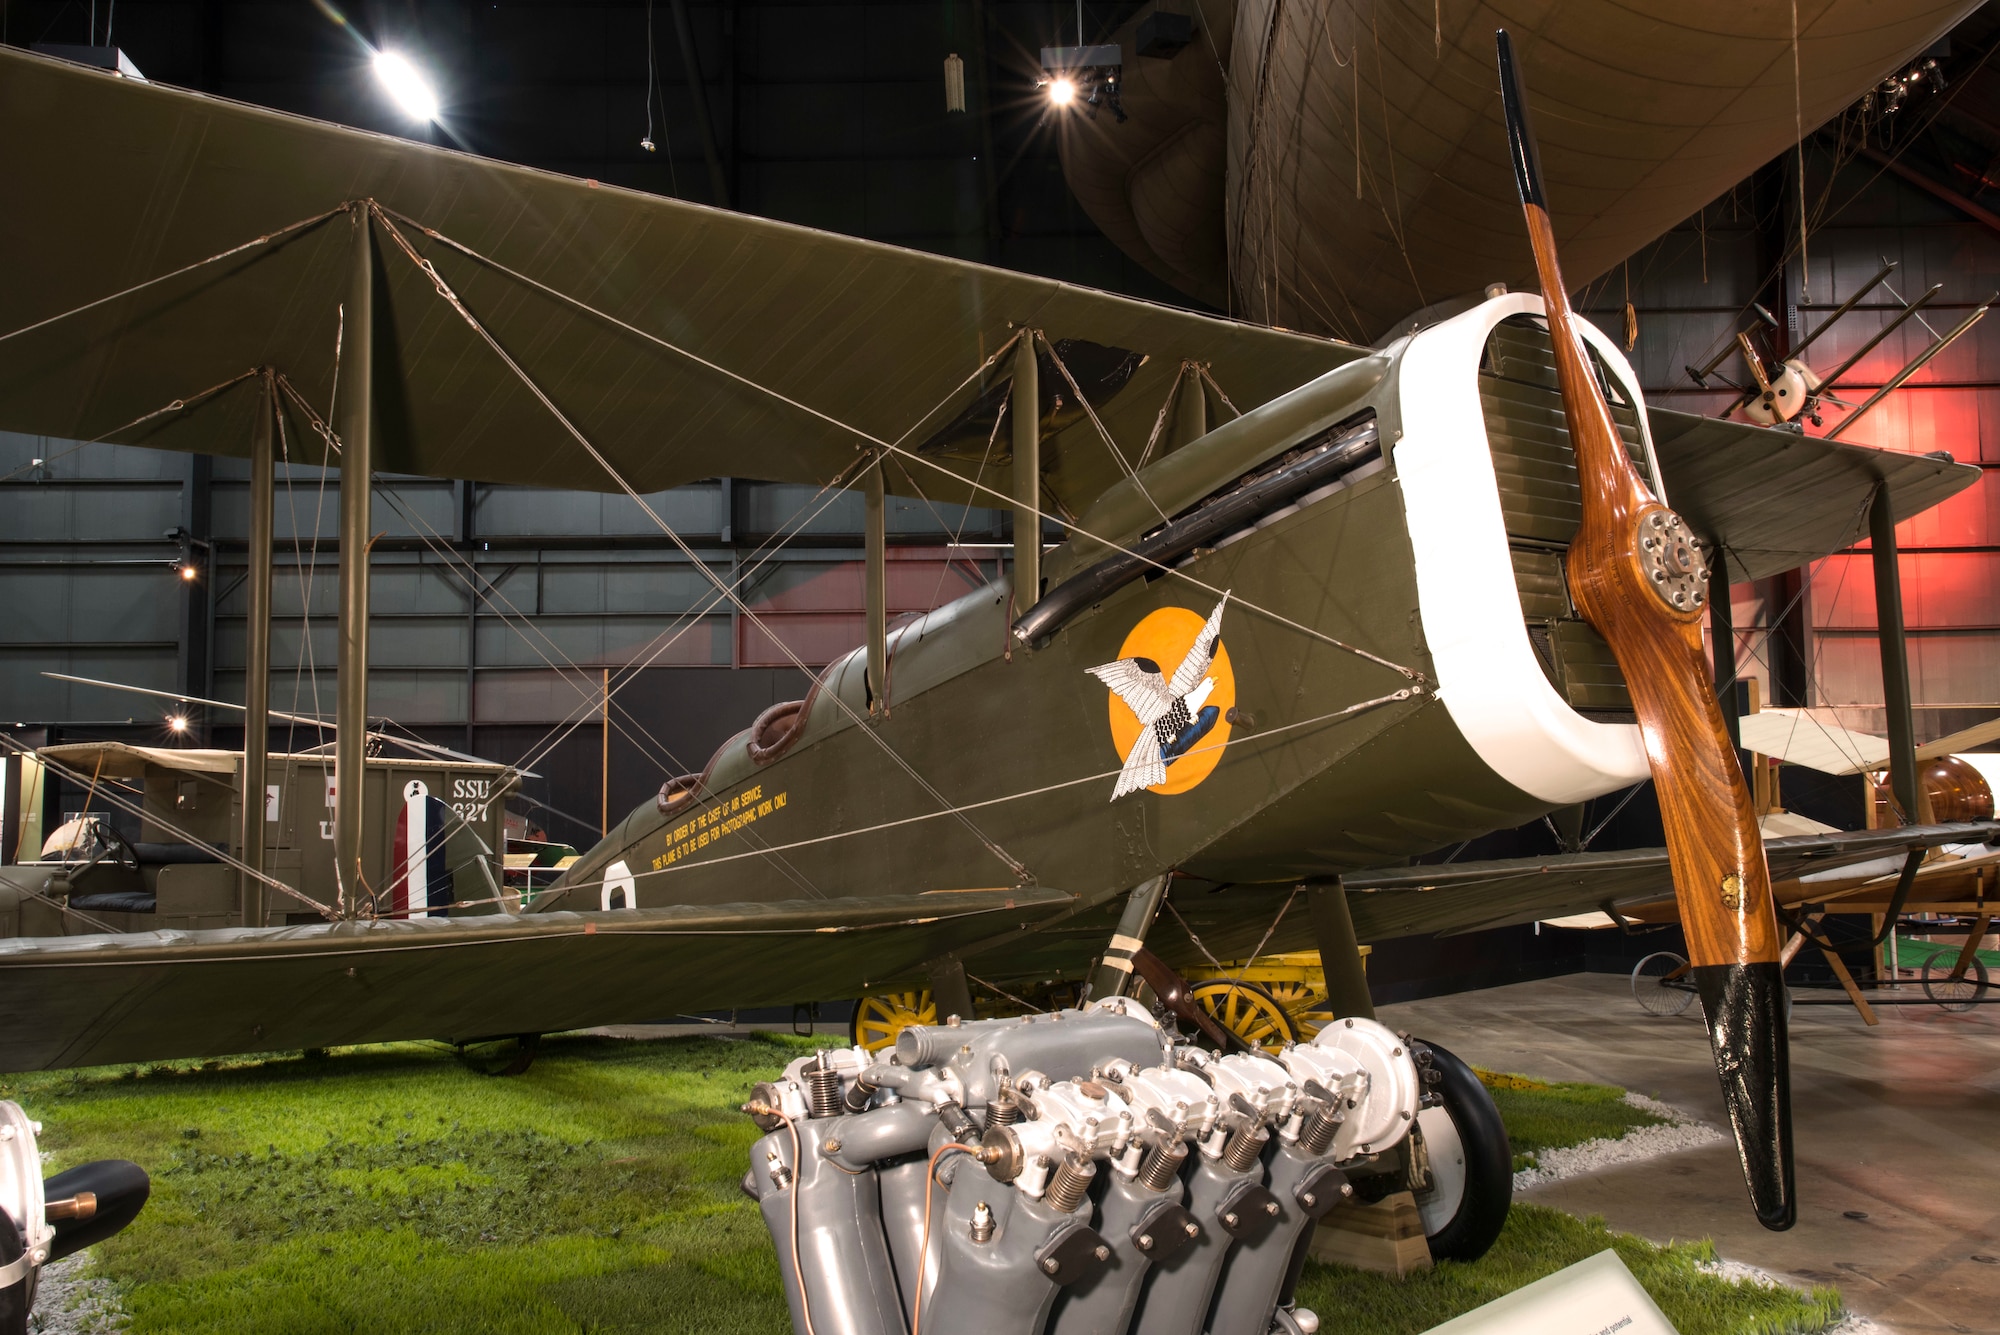 DAYTON, Ohio -- De Havilland DH-4 in the Early Years Gallery at the National Museum of the United States Air Force. (U.S. Air Force photo by Ken LaRock)